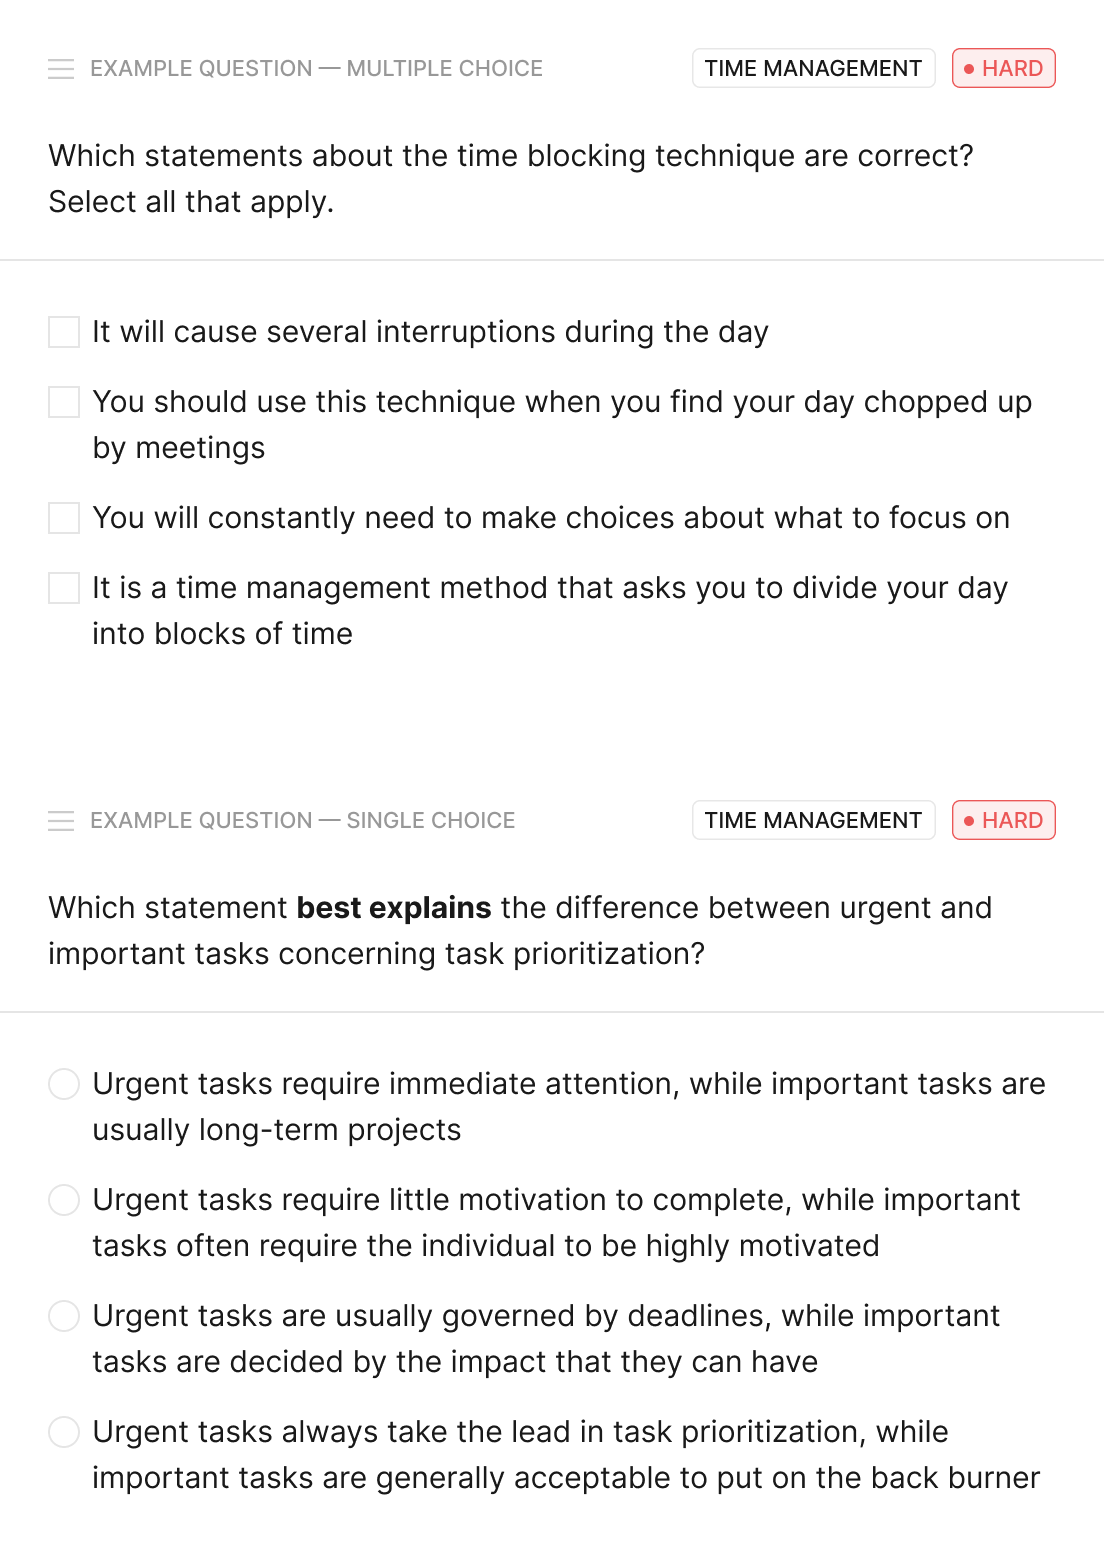 attention to detail skills test sample questions on toggl hire